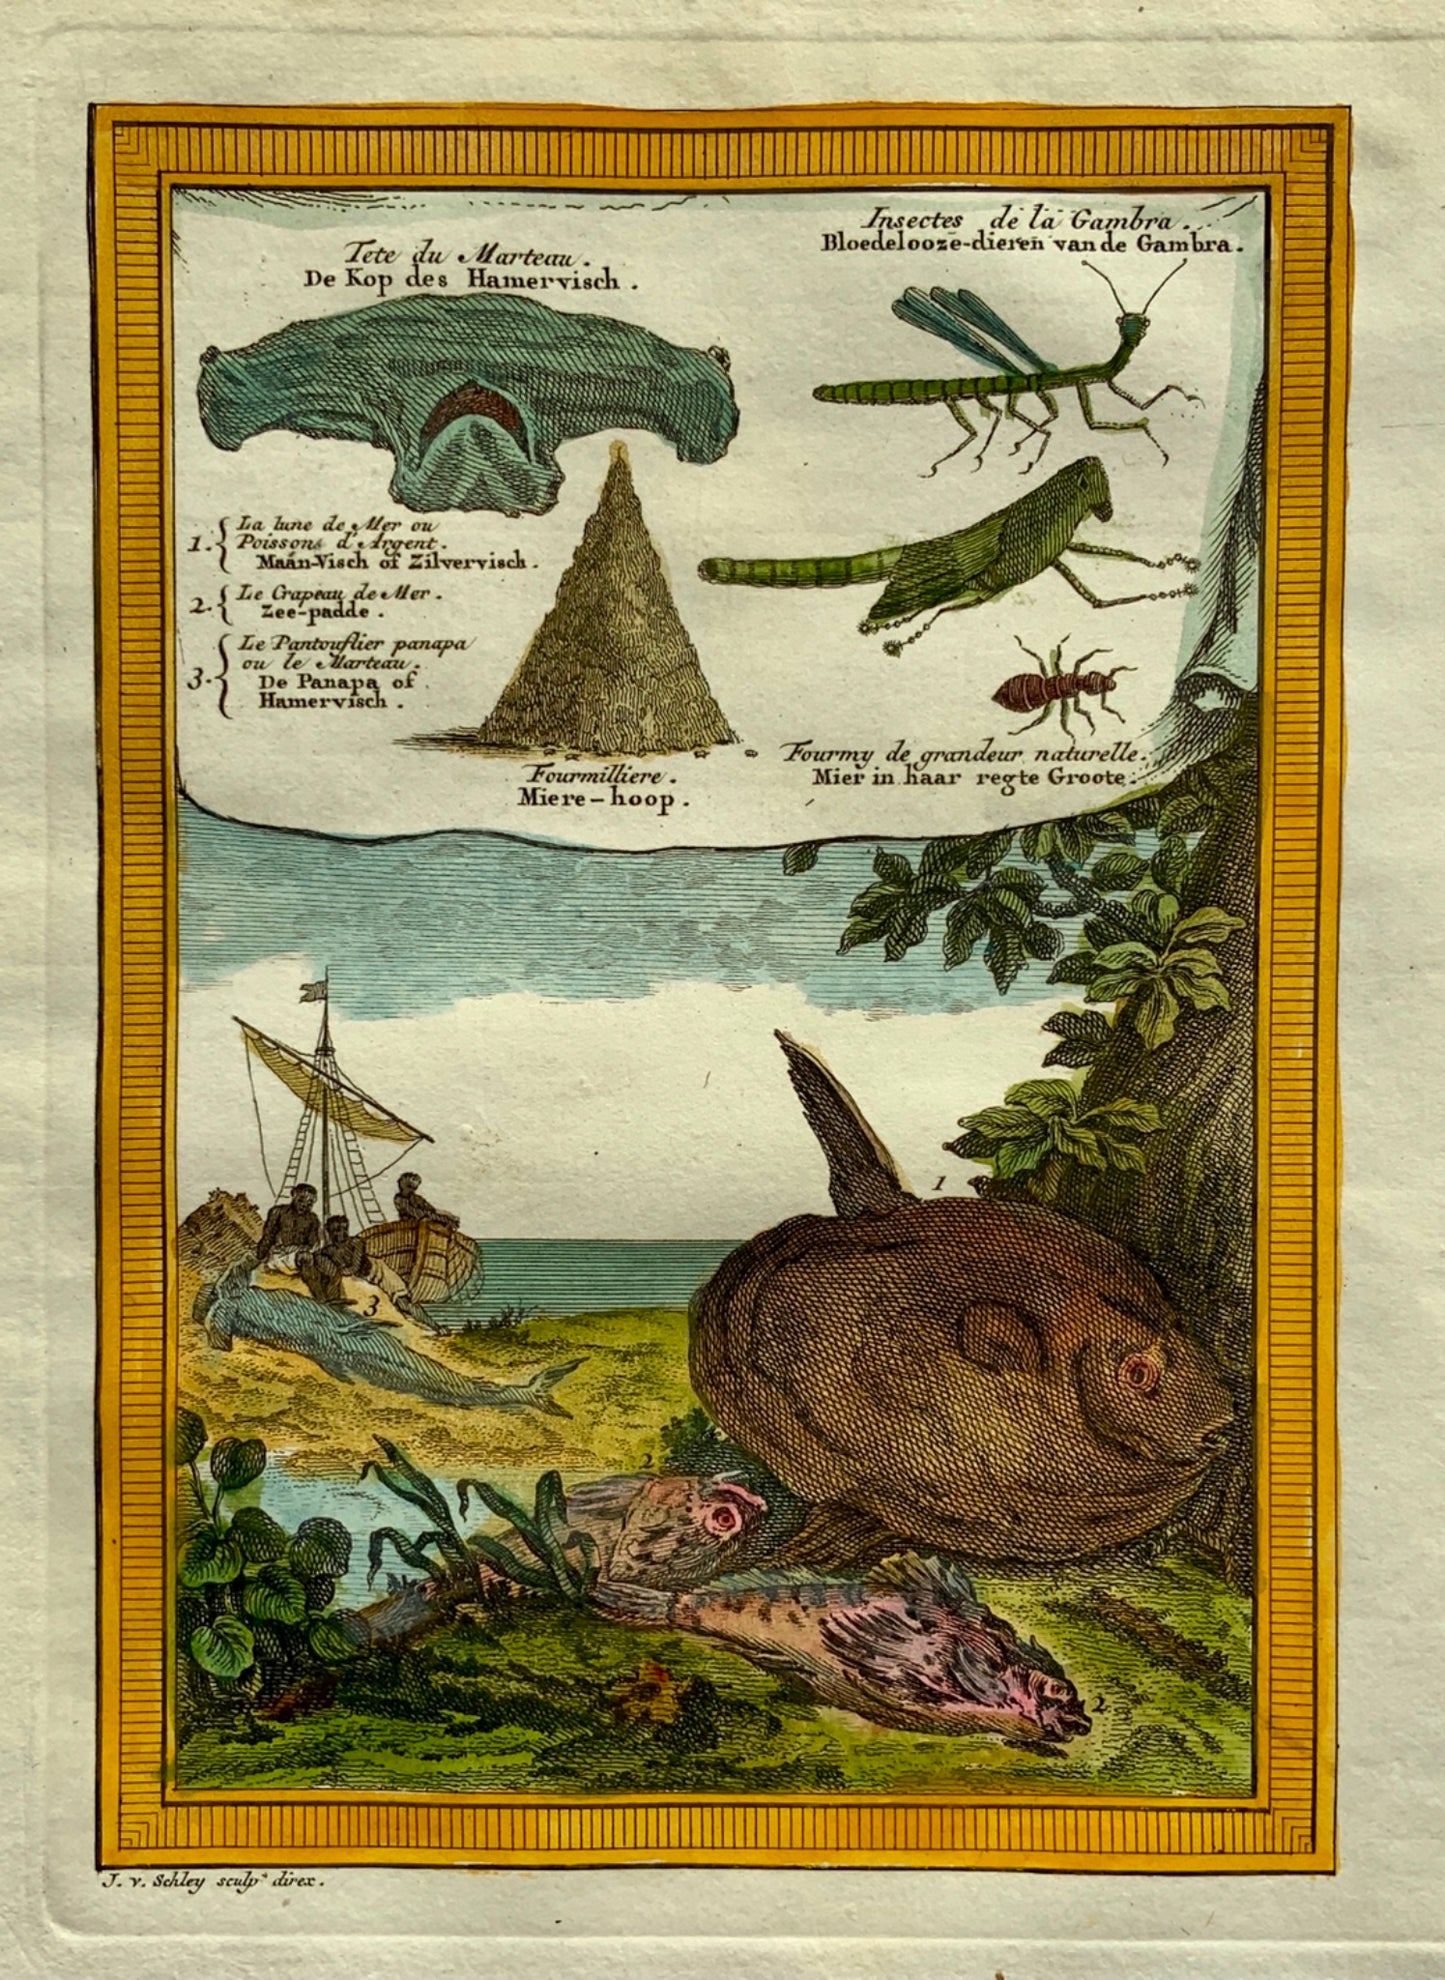 1750 Schley - West Africa - Sunfish, Hammerhead Shark, Insects - Travel - Zoology